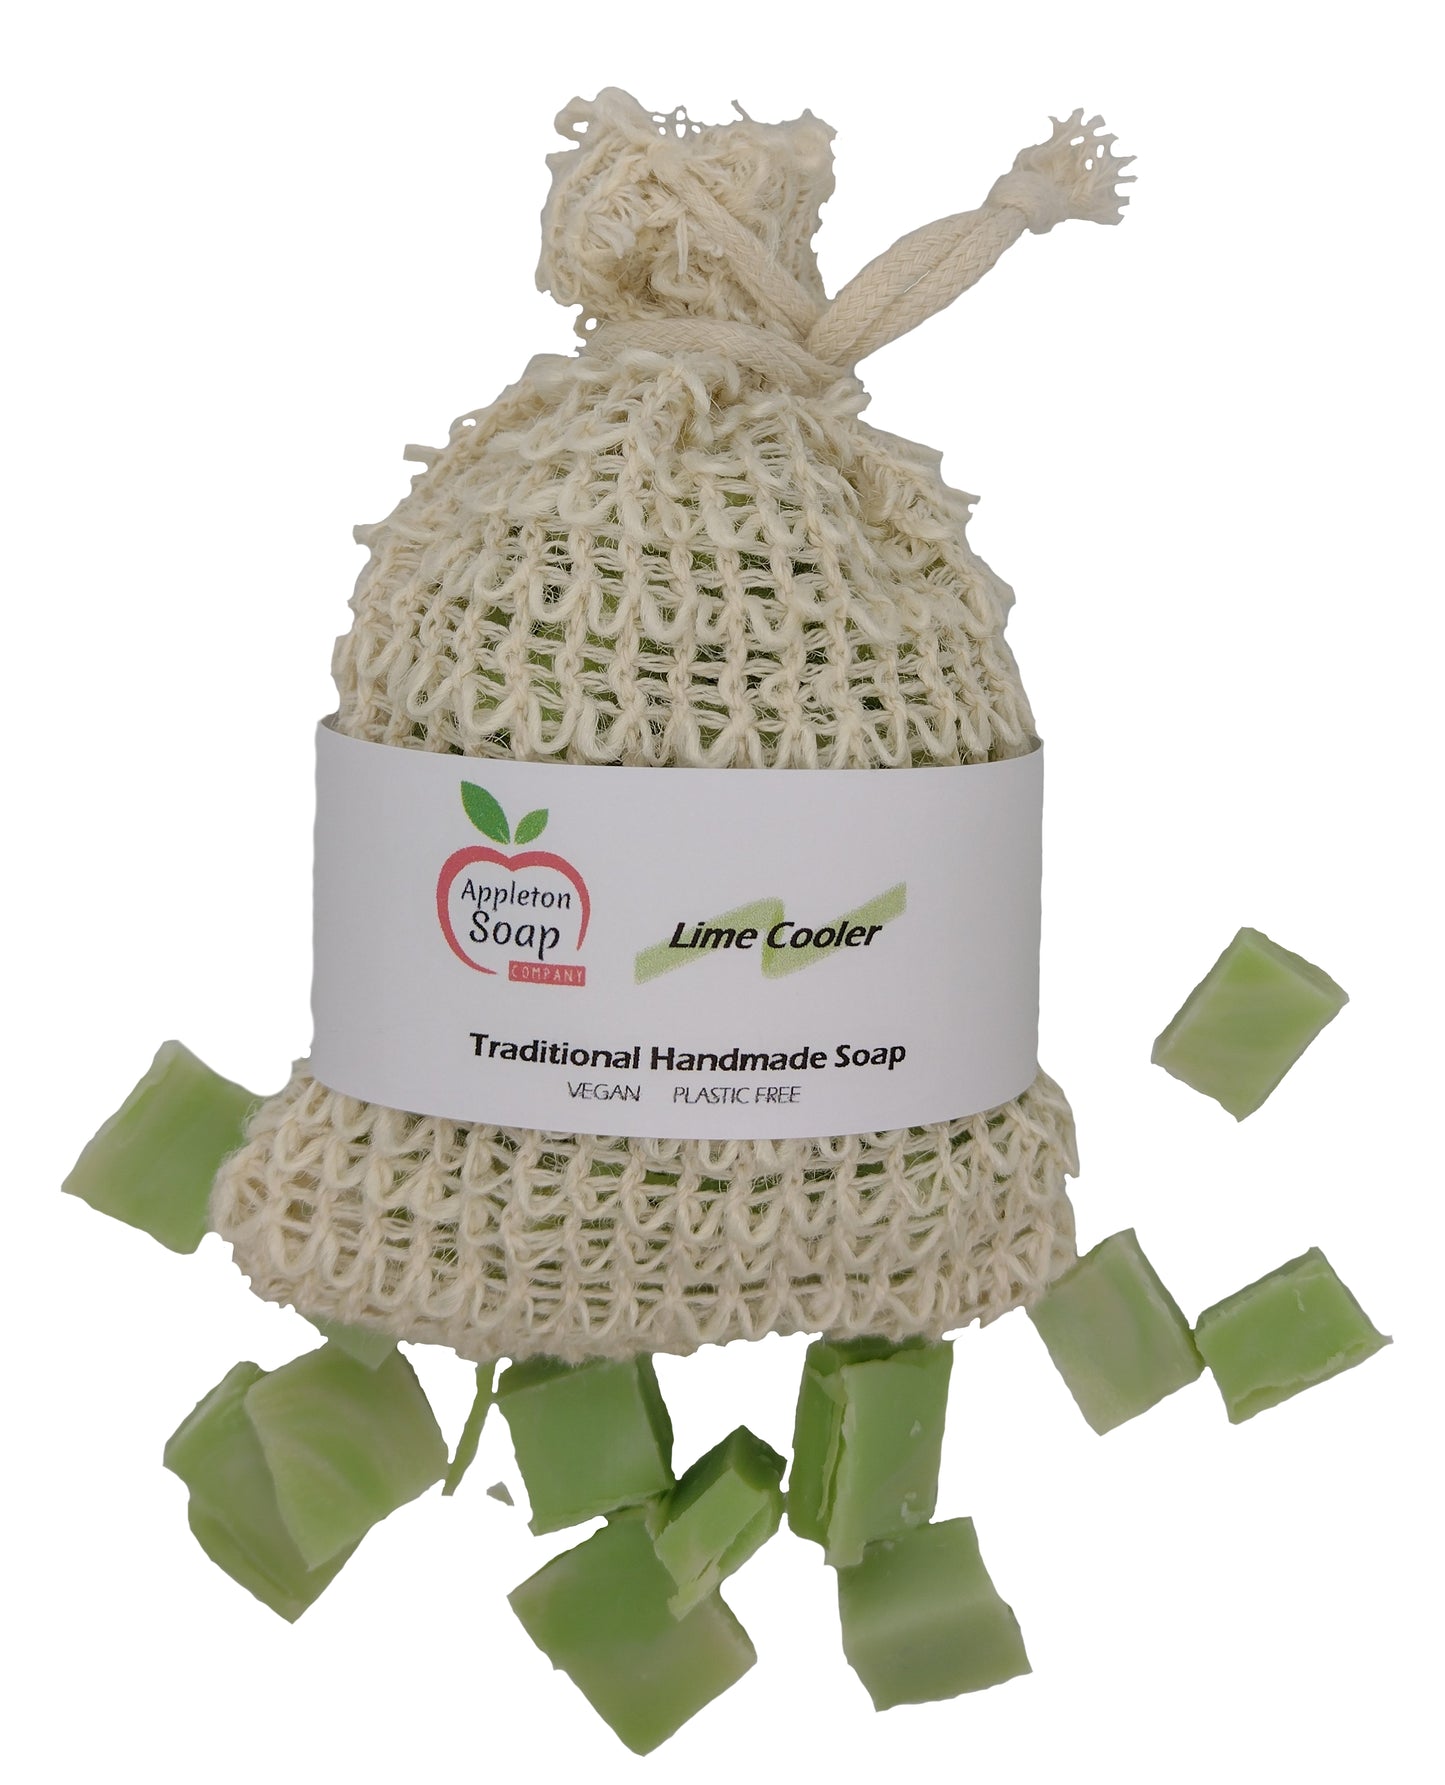 Lime cooler sisal soap bag with Lime cooler soap pieces